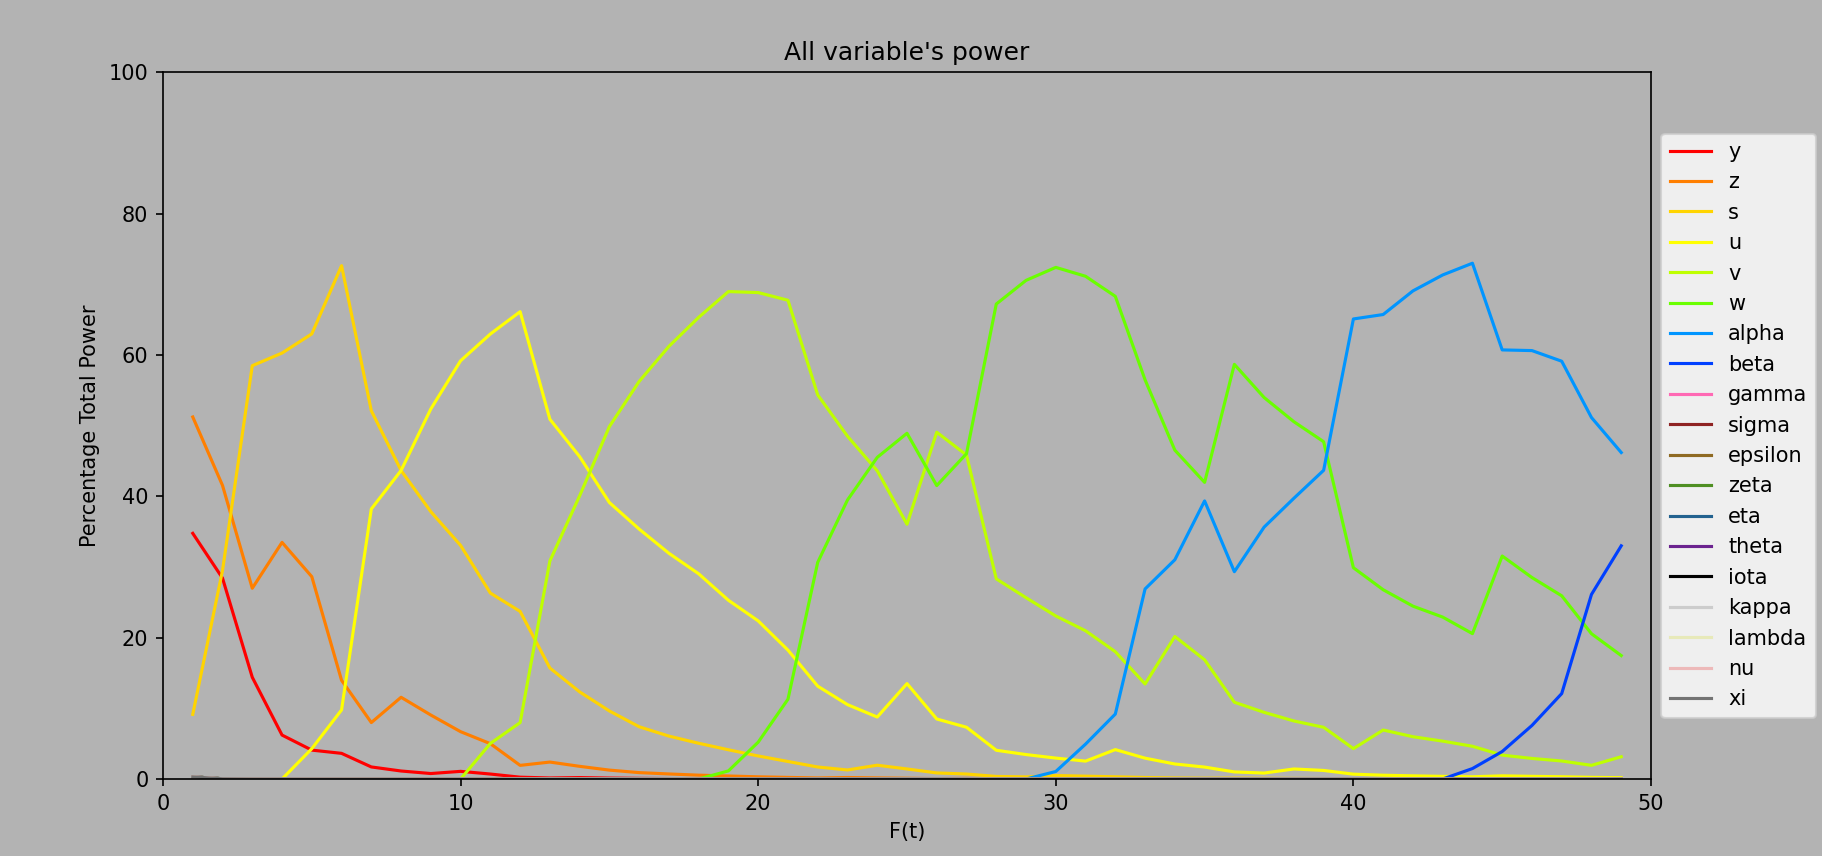 Percentage variable power up to ee50